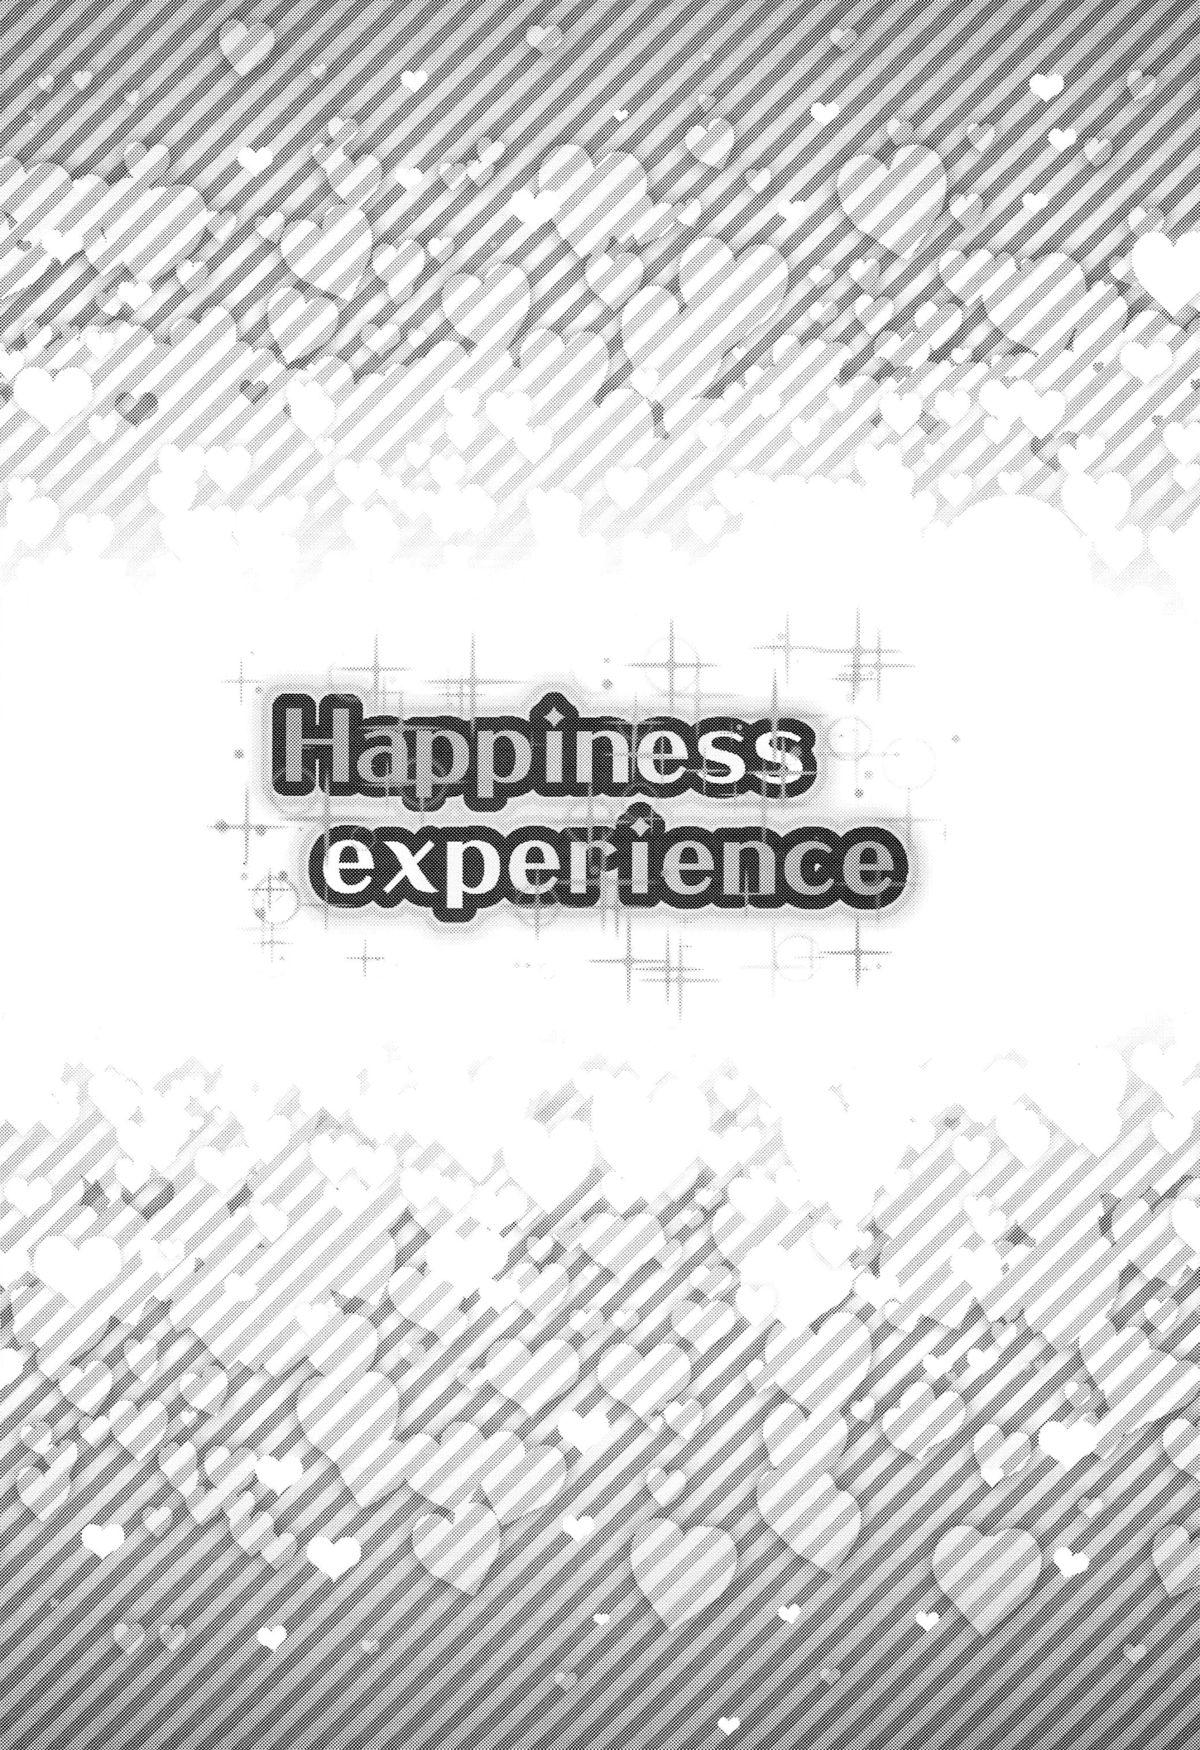 Happiness experience 2